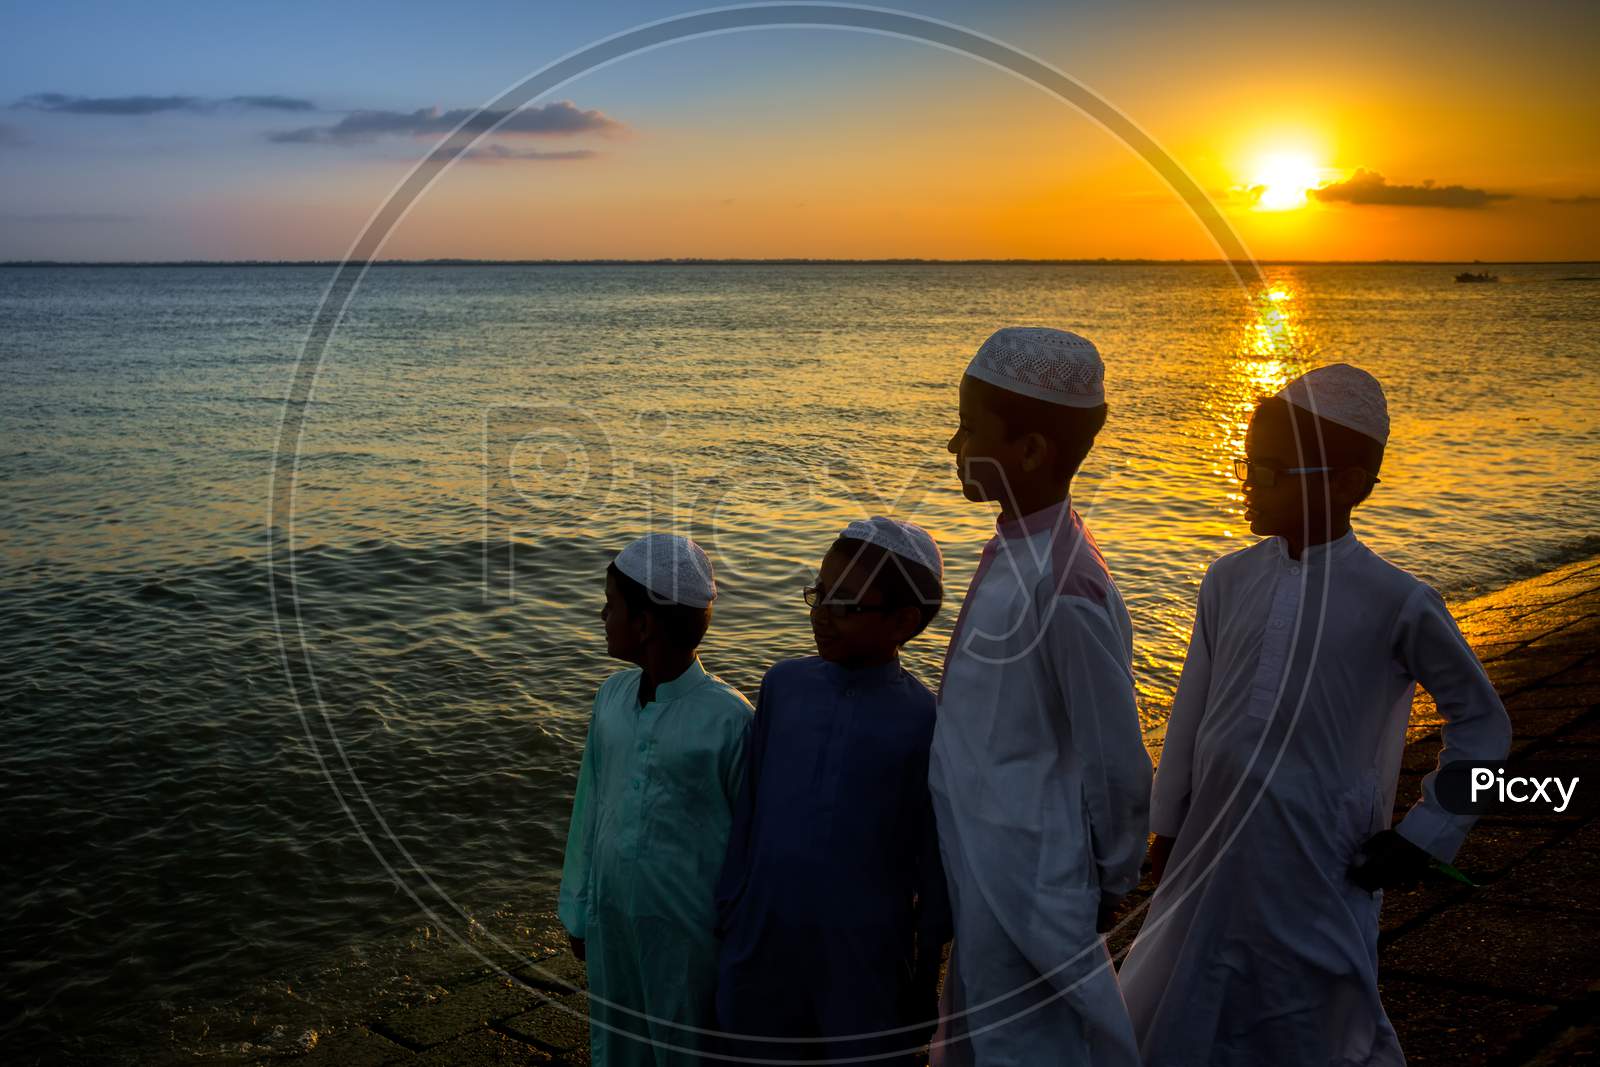 Bangladesh – June 22, 2019: Some Muslim Boys Are Standing By The Riverside Watching The Evening Sunset At Chandpur, Bangladesh.